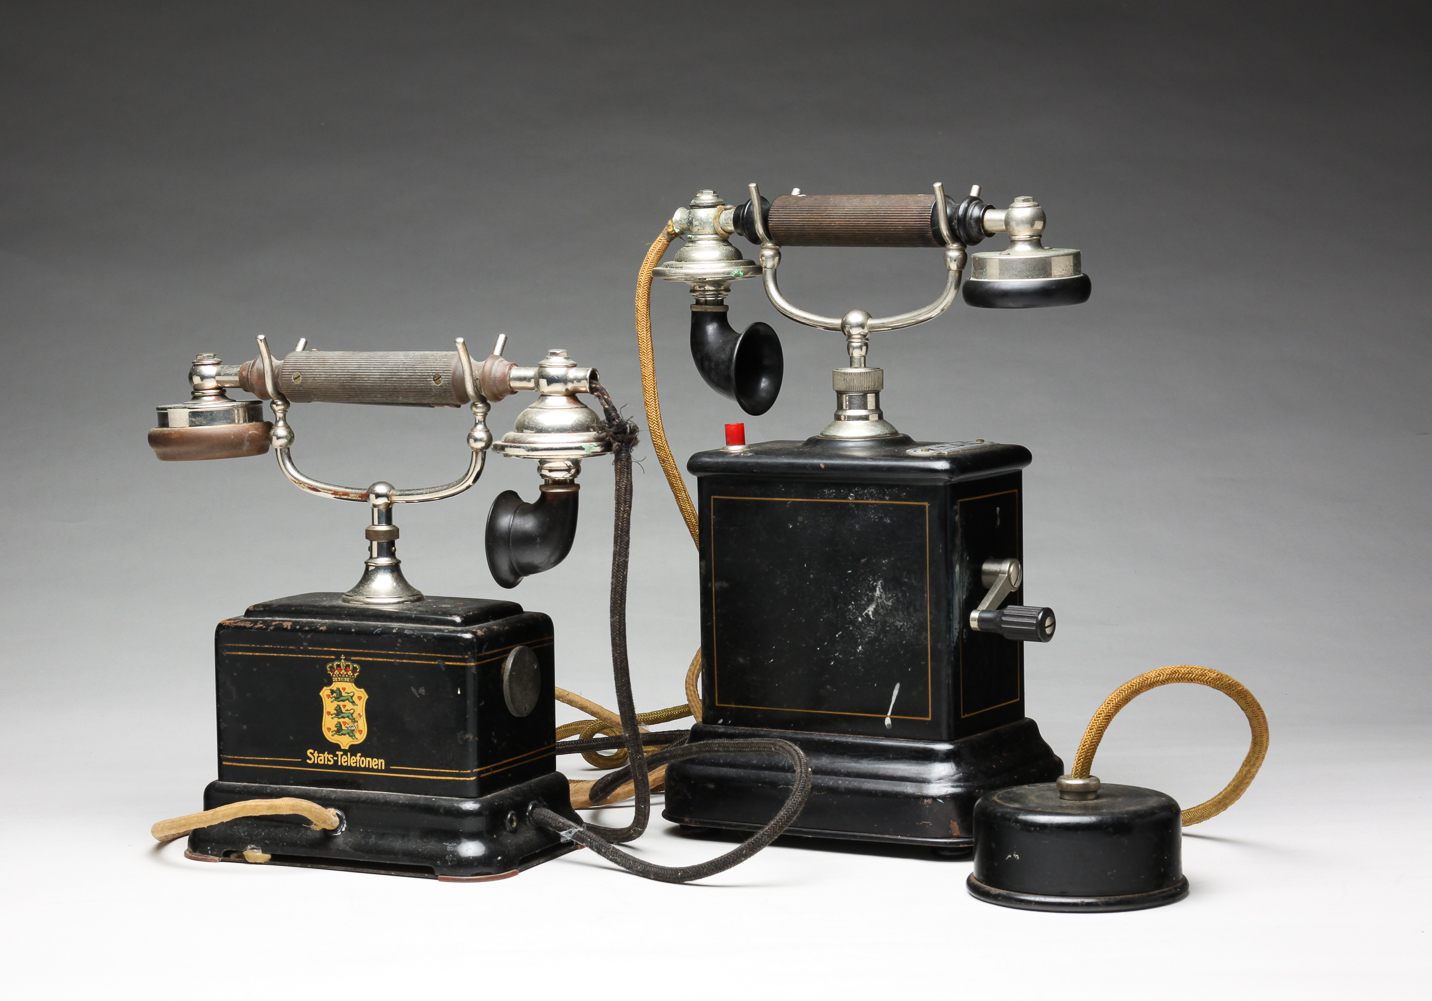 TWO EUROPEAN TELEPHONES. First